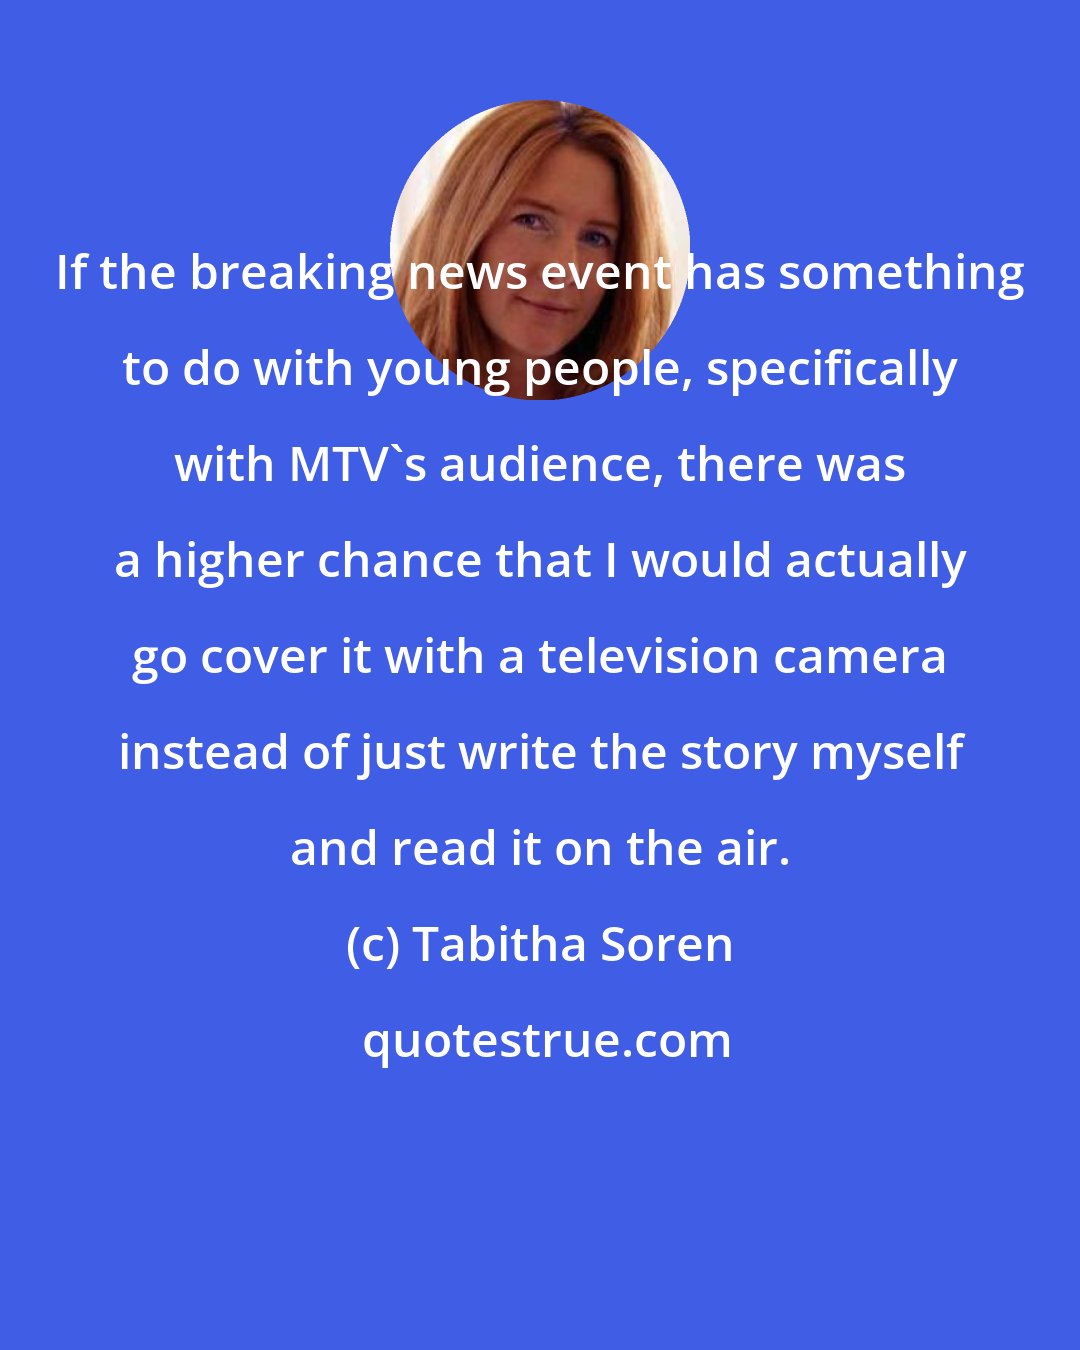 Tabitha Soren: If the breaking news event has something to do with young people, specifically with MTV's audience, there was a higher chance that I would actually go cover it with a television camera instead of just write the story myself and read it on the air.